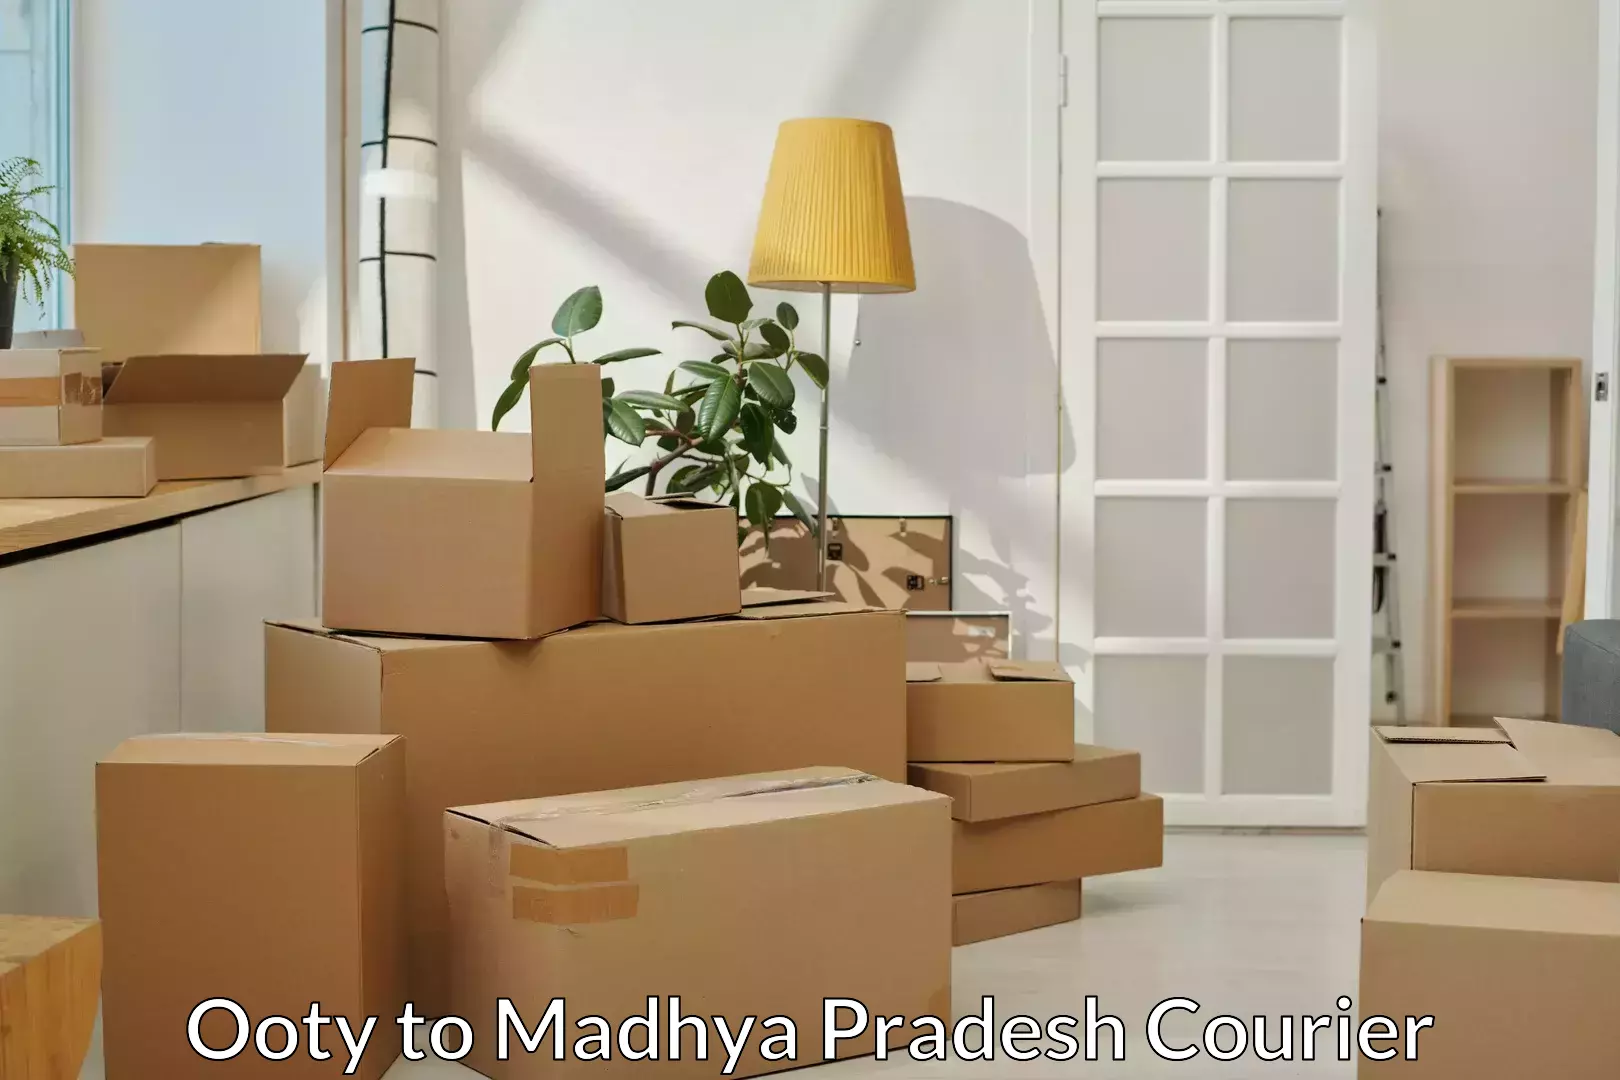 Furniture relocation experts Ooty to Madhya Pradesh